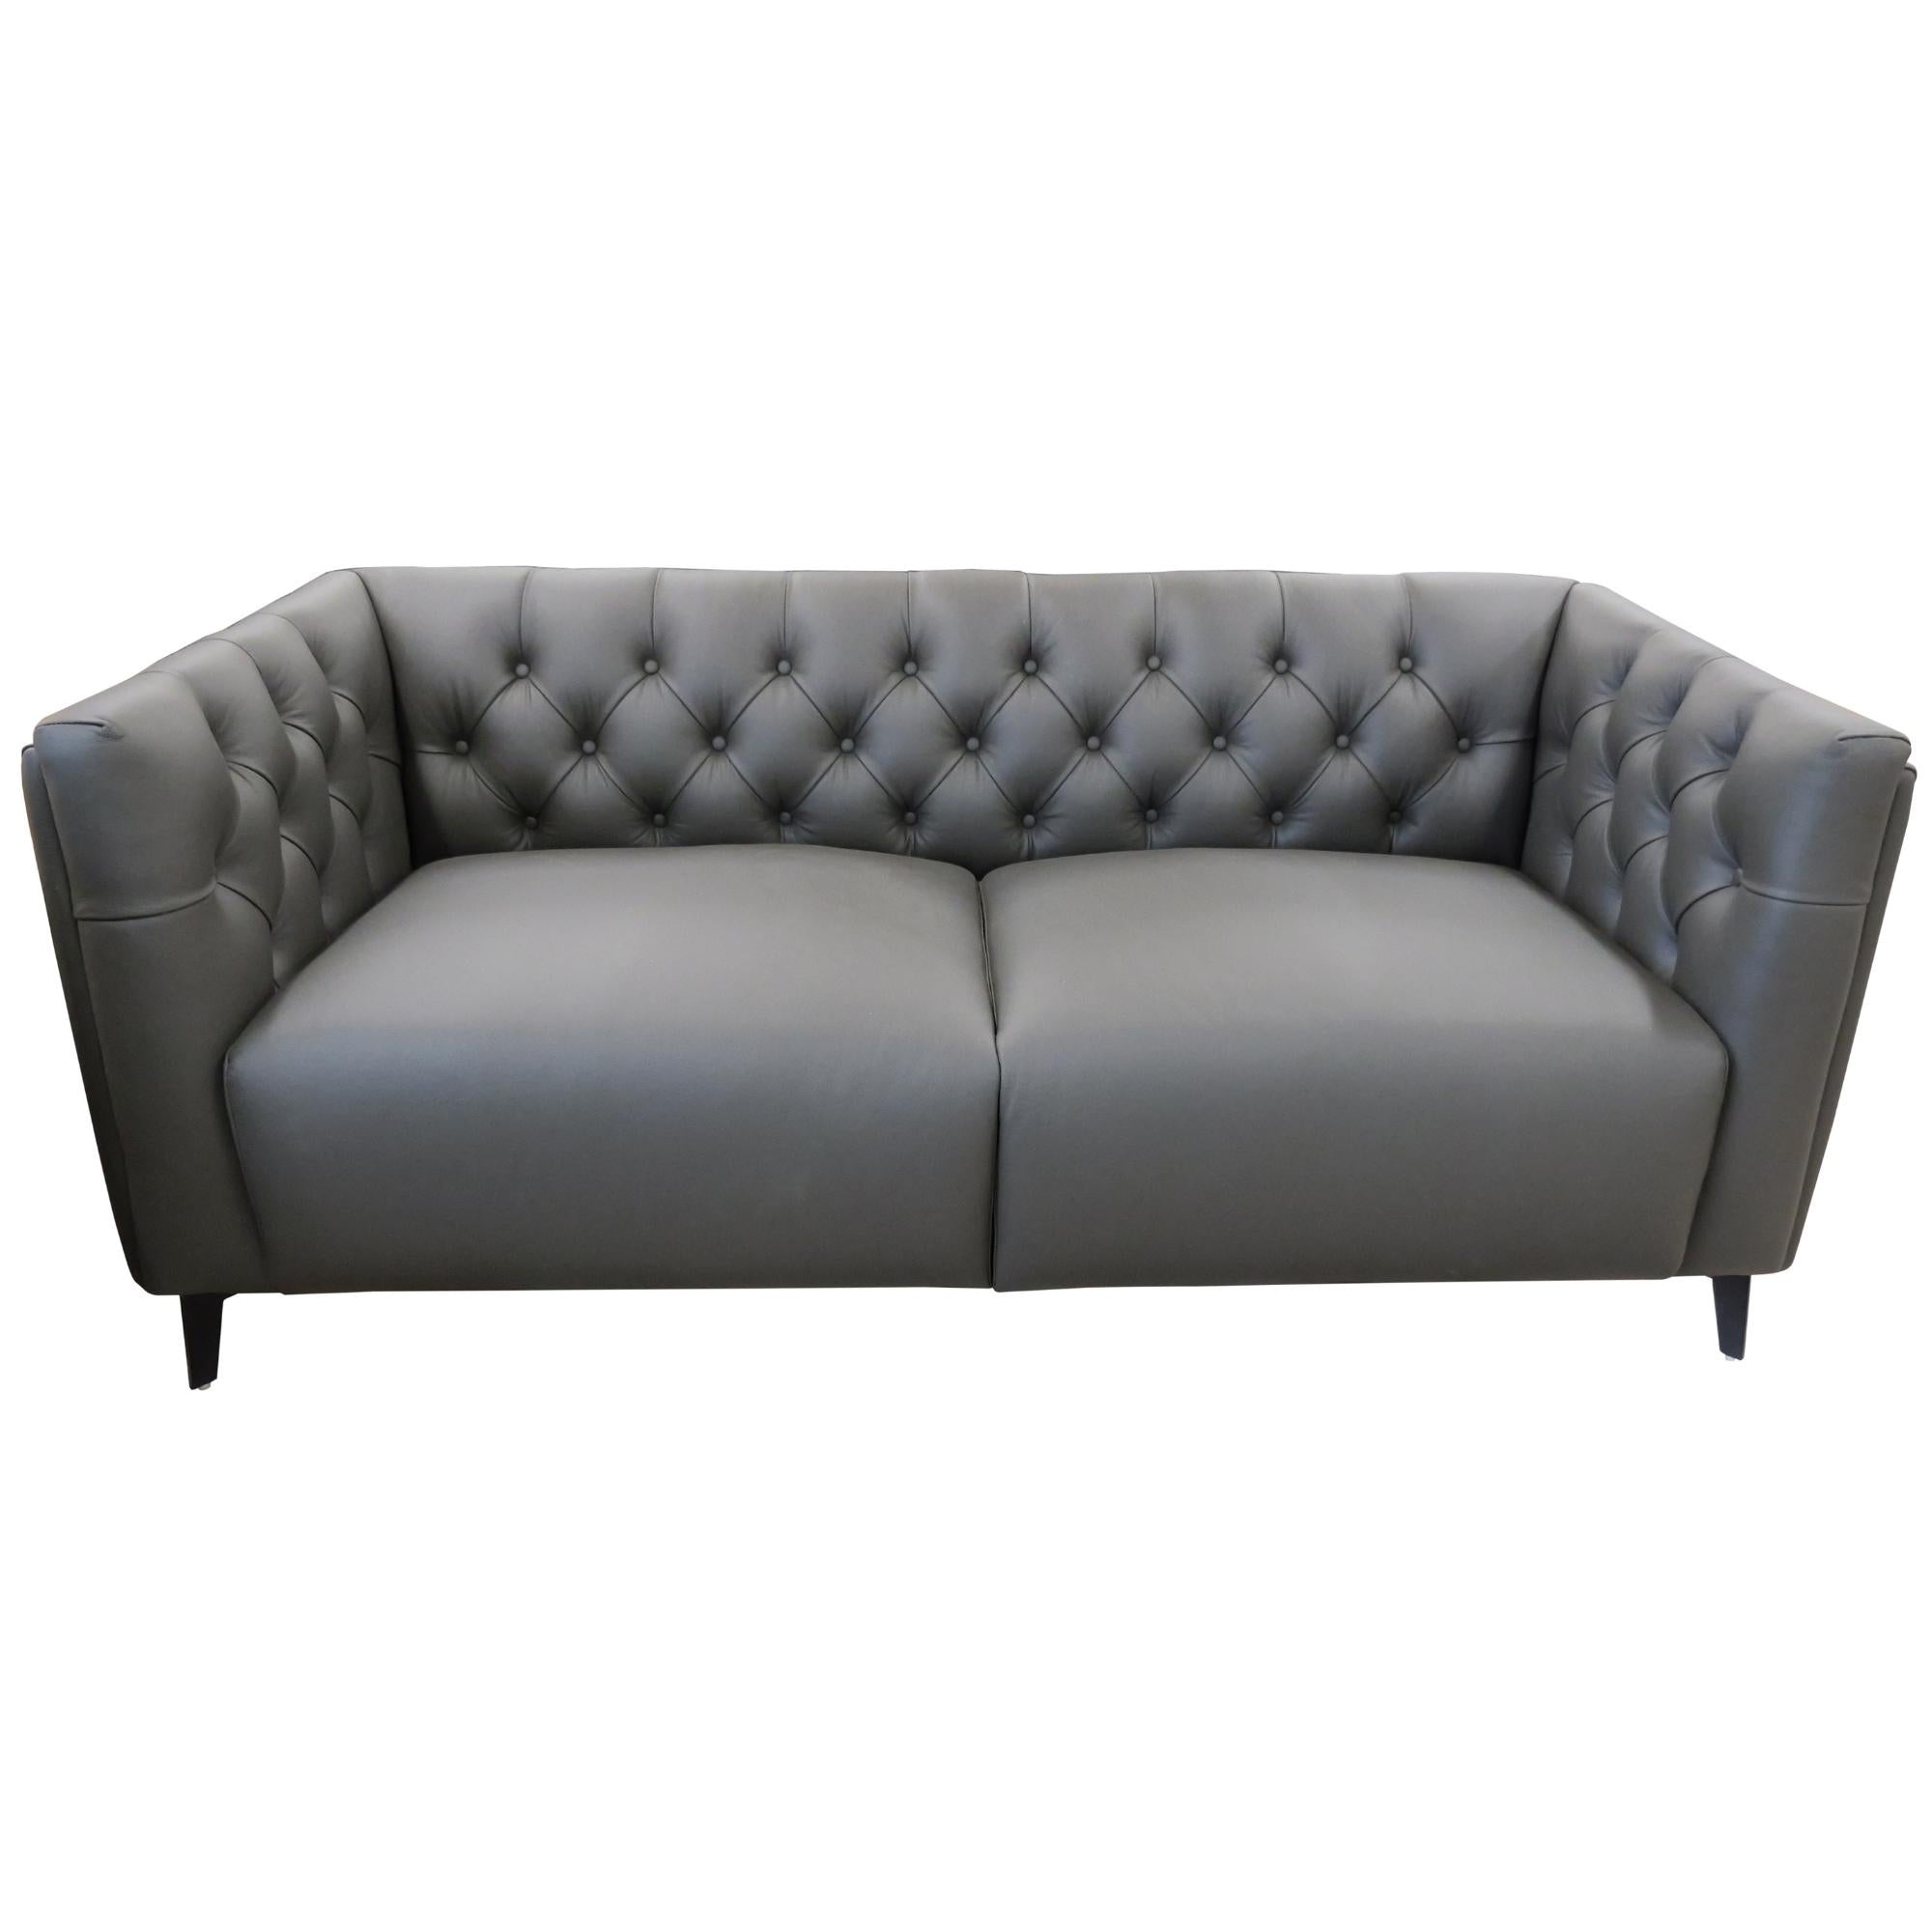 Luxe Genuine Forli Leather Sofa 2.5 Seater Upholstered Lounge Couch - Dark Grey